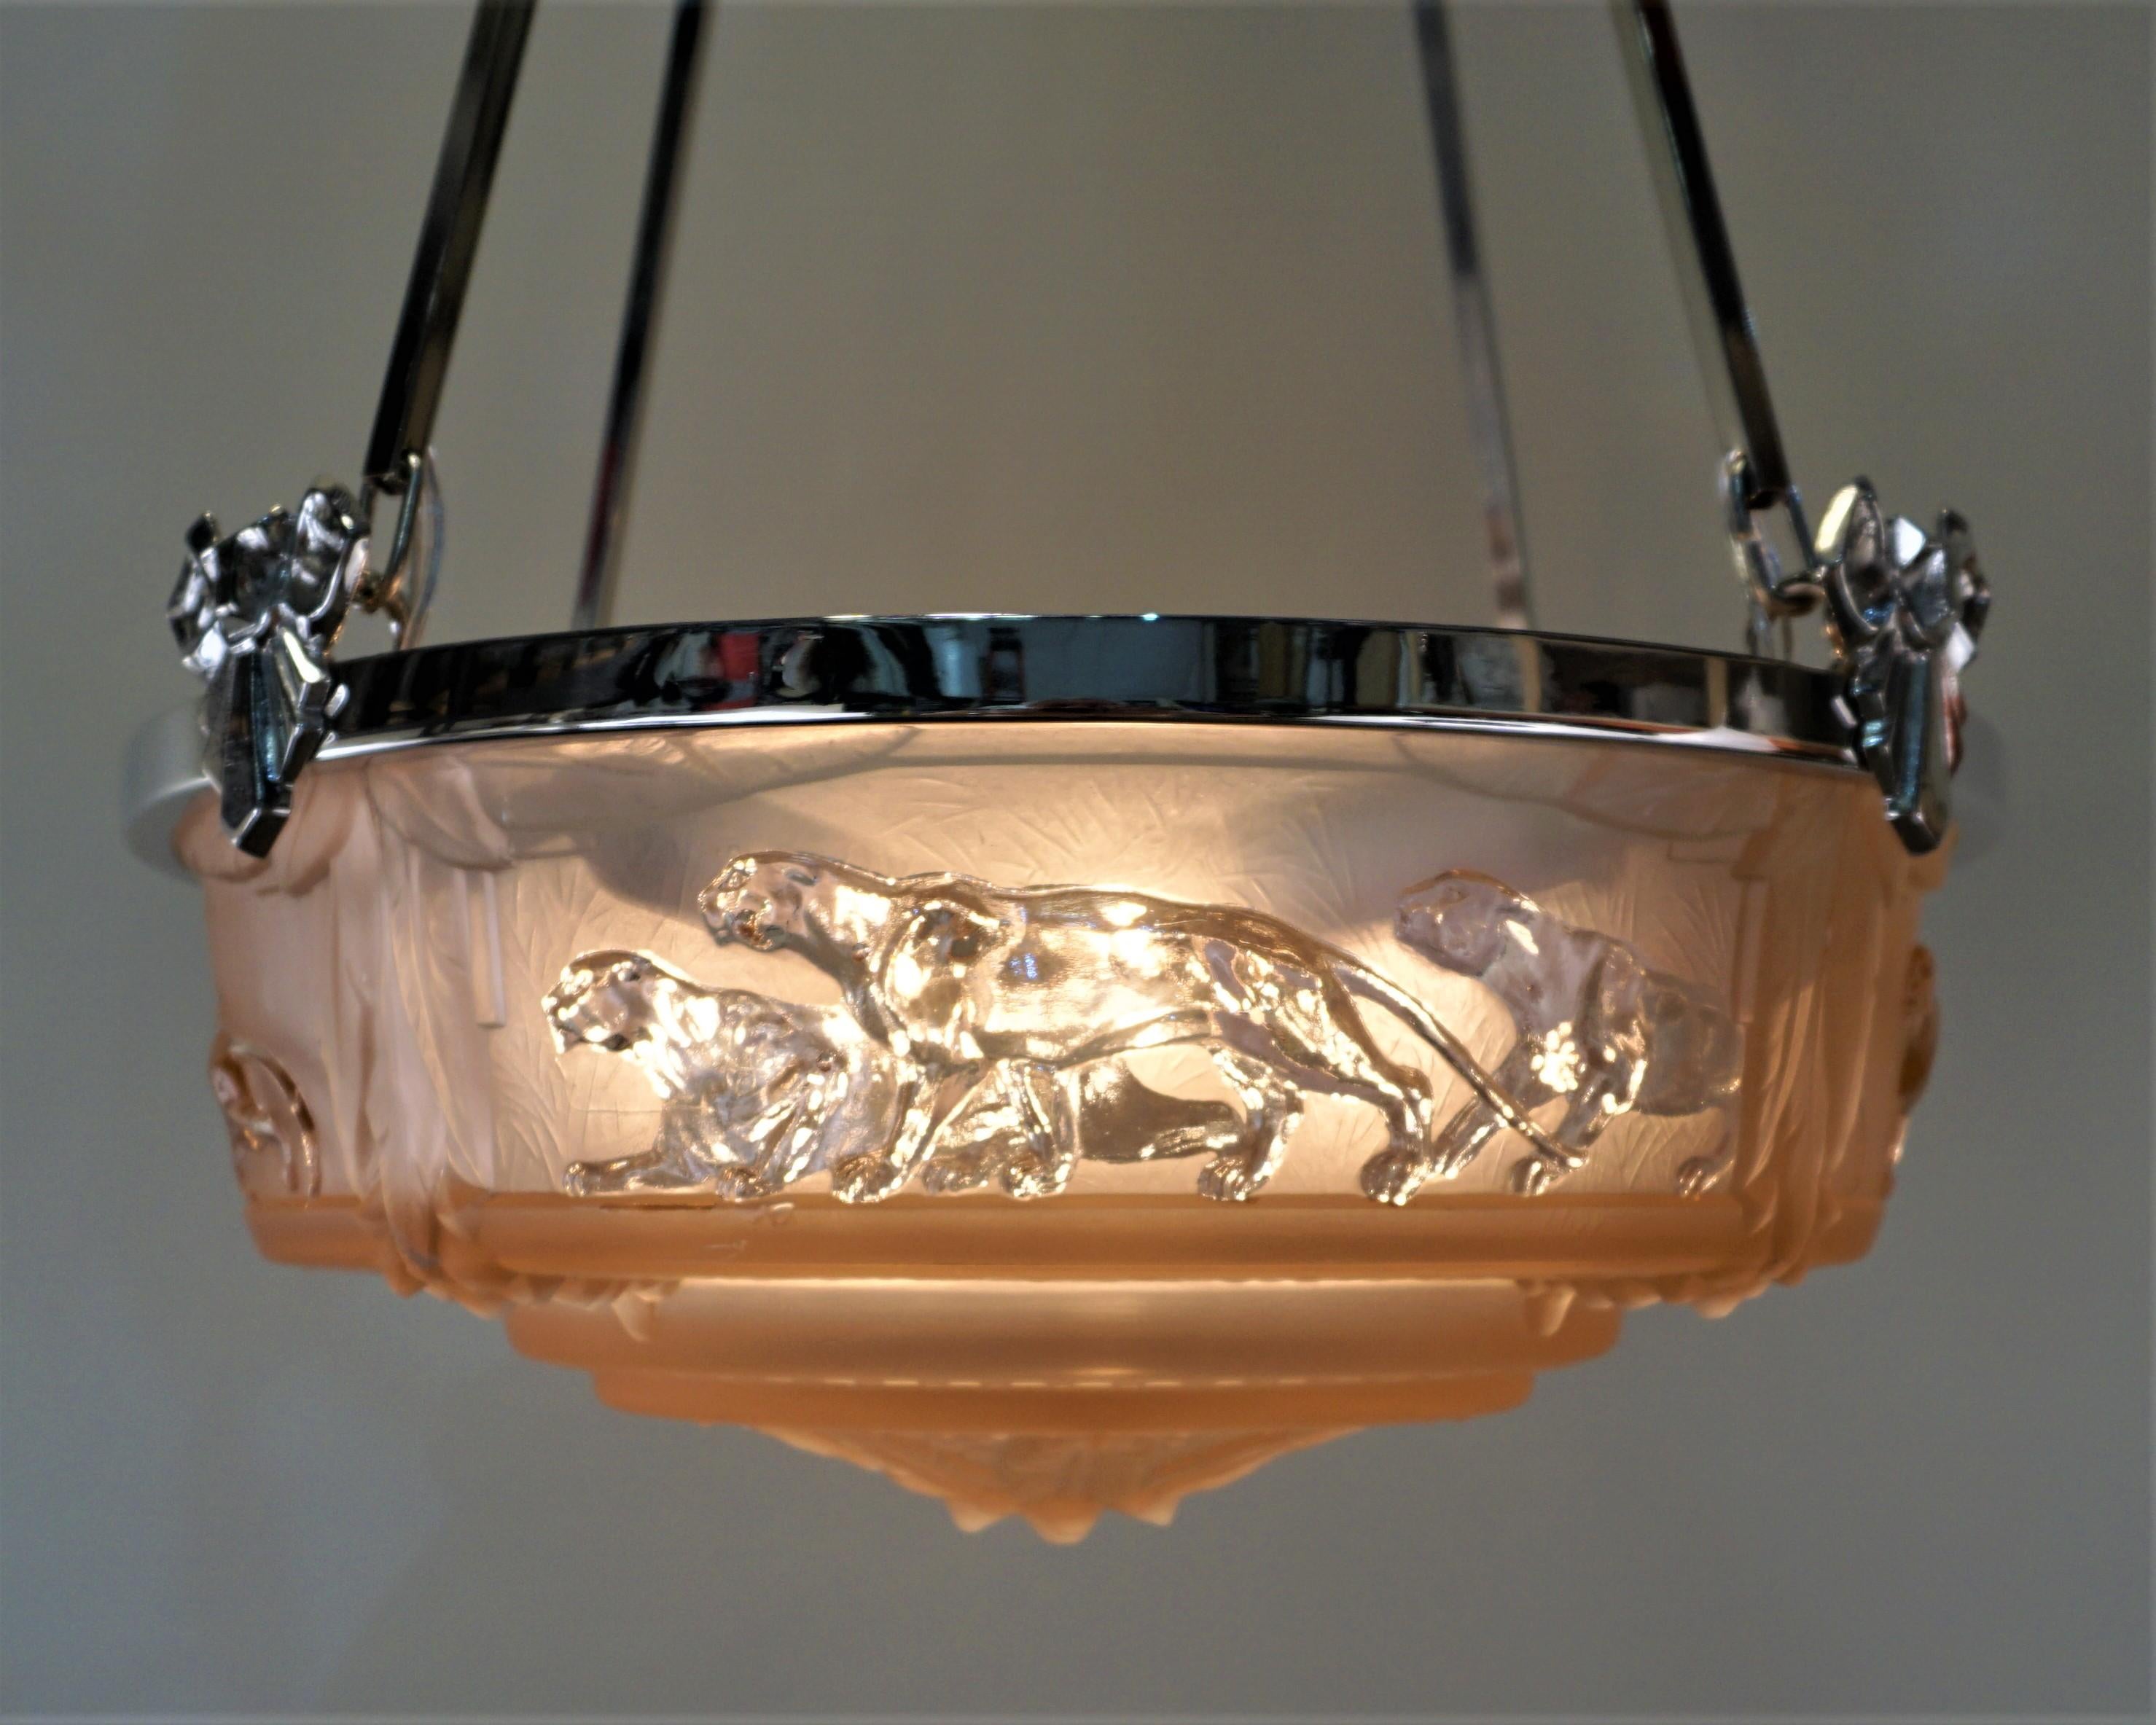 Pink glass in clear and Frost features panthers, nickel on bronze frame chandelier.
Height can be adjusted by cutting the rods.